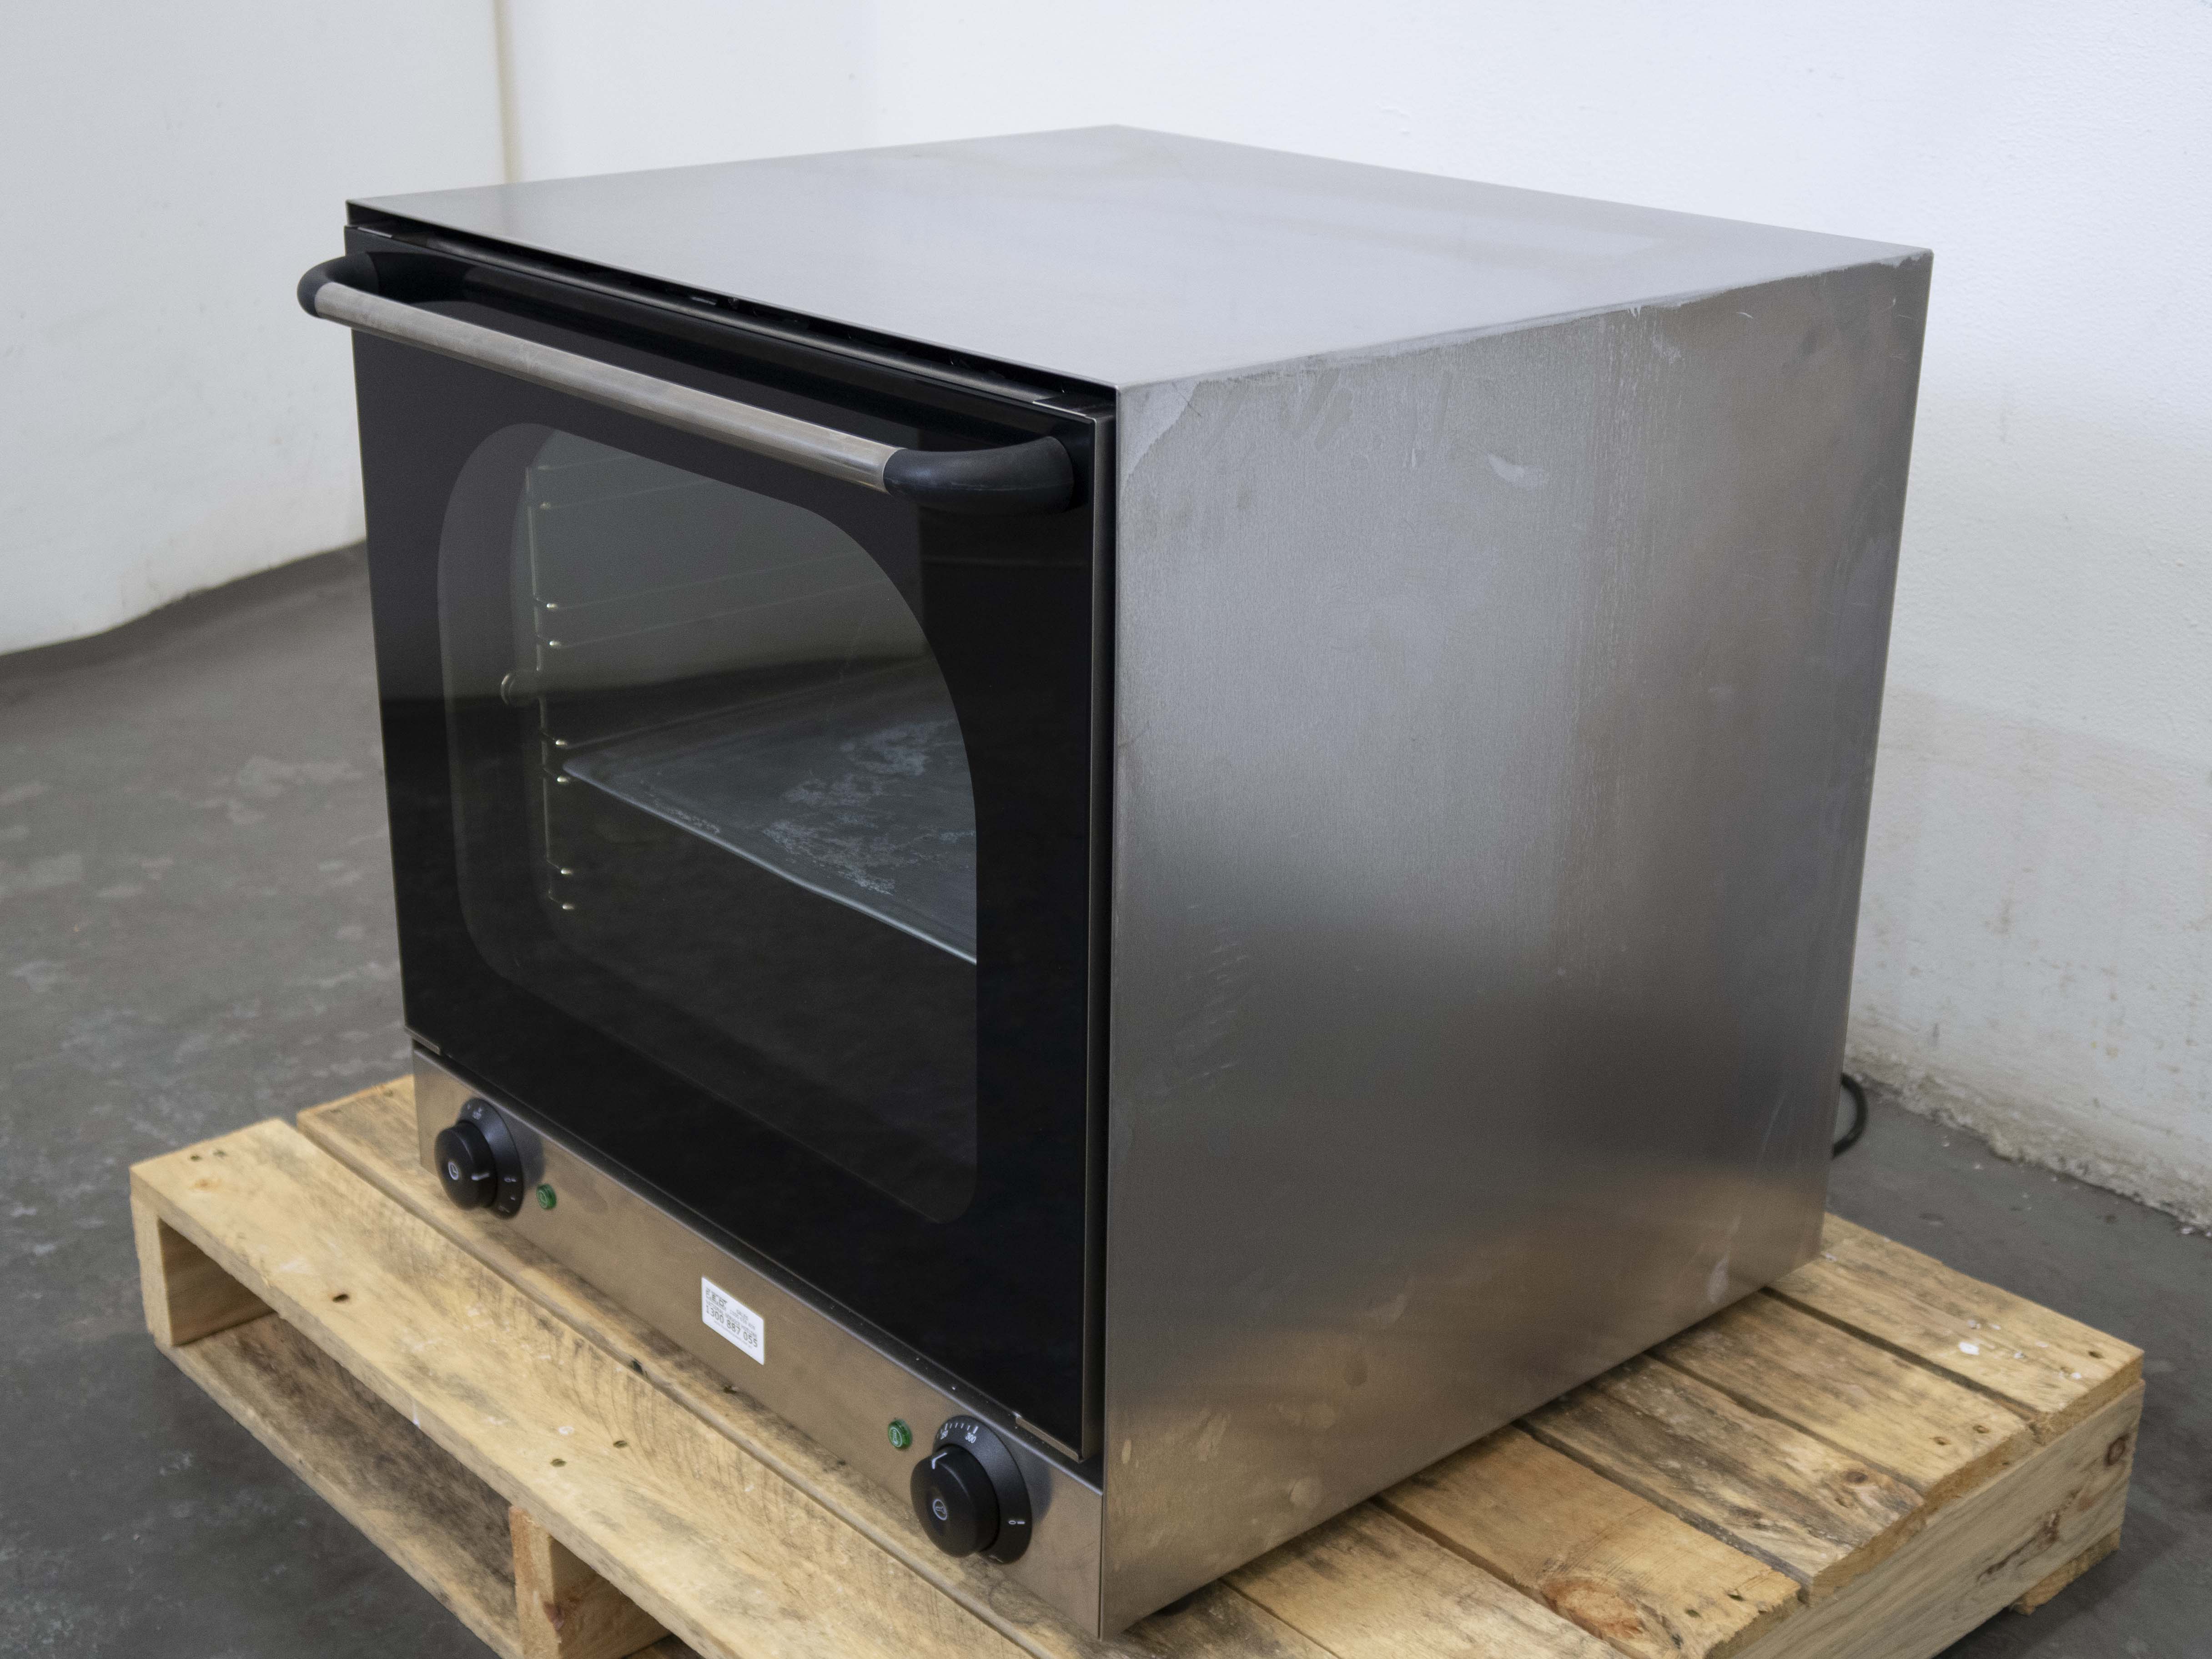 Thumbnail - FED YXD-1AE Convection Oven